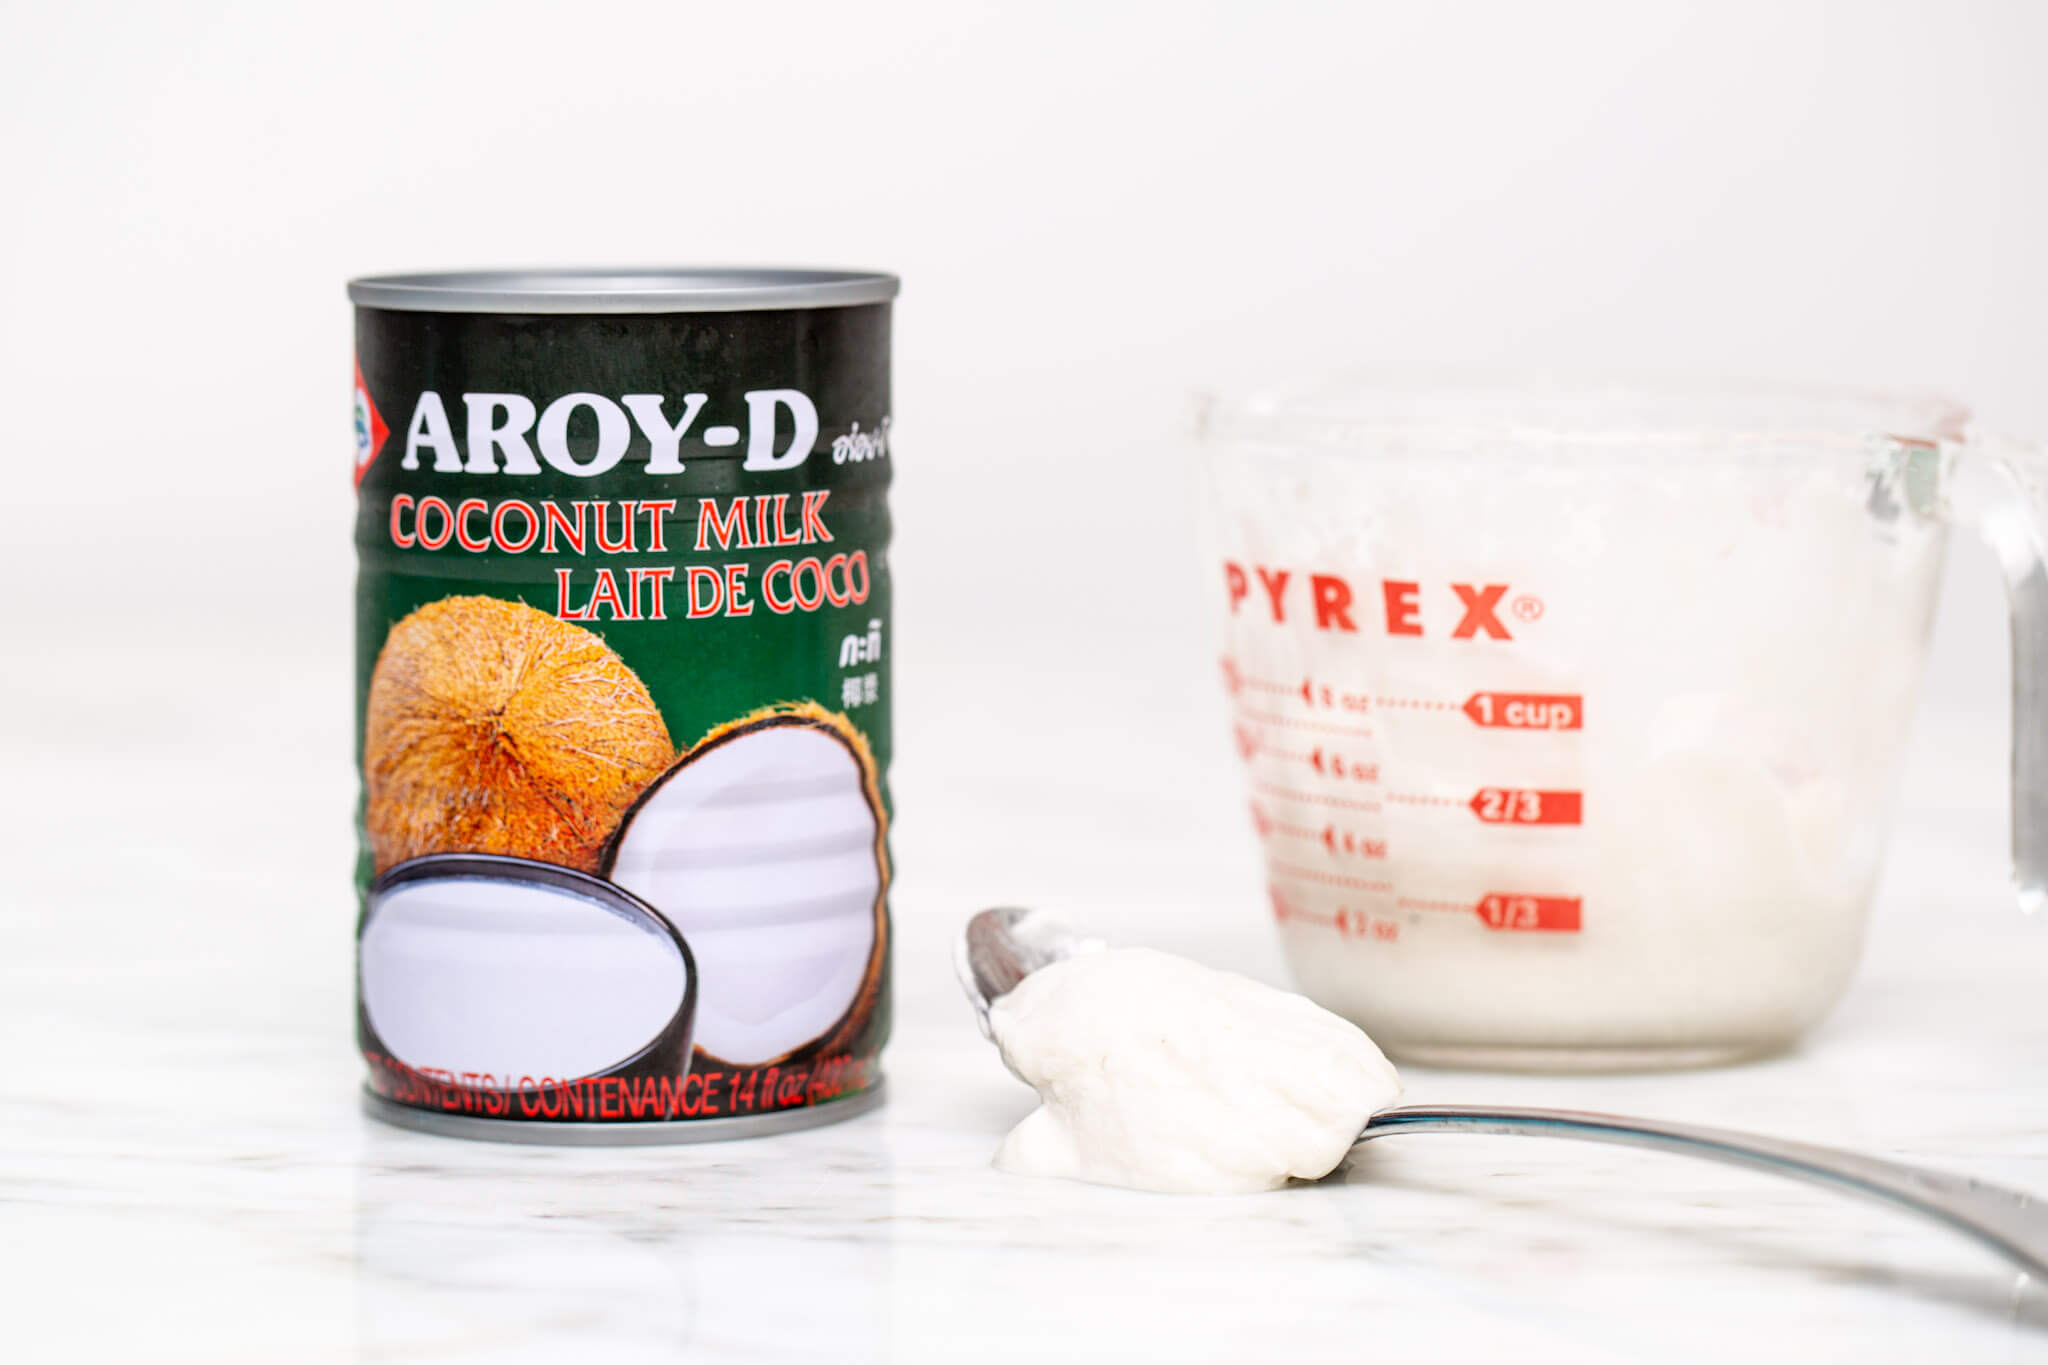 Making coconut cream by separating Aroy-D coconut milk